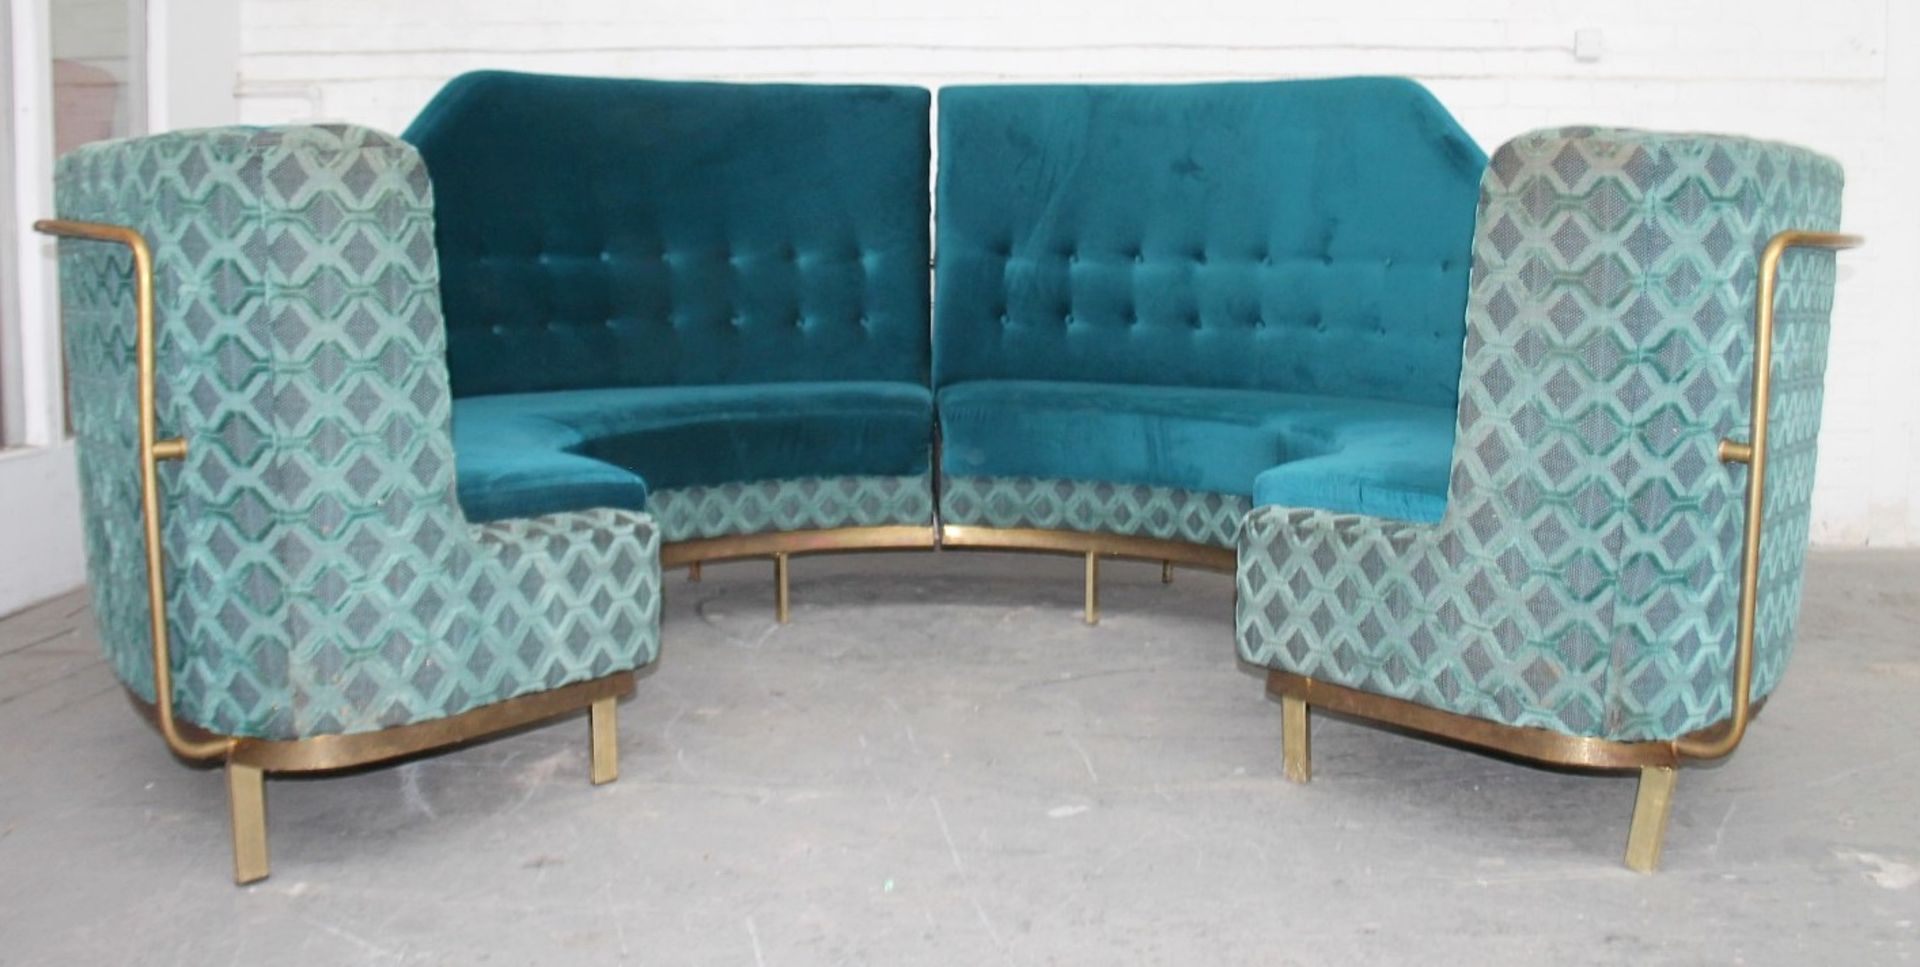 1 x Bespoke Commercial Curved C-Shaped Booth Seating Upholstered In Premium Teal Coloured Fabrics - - Image 5 of 17